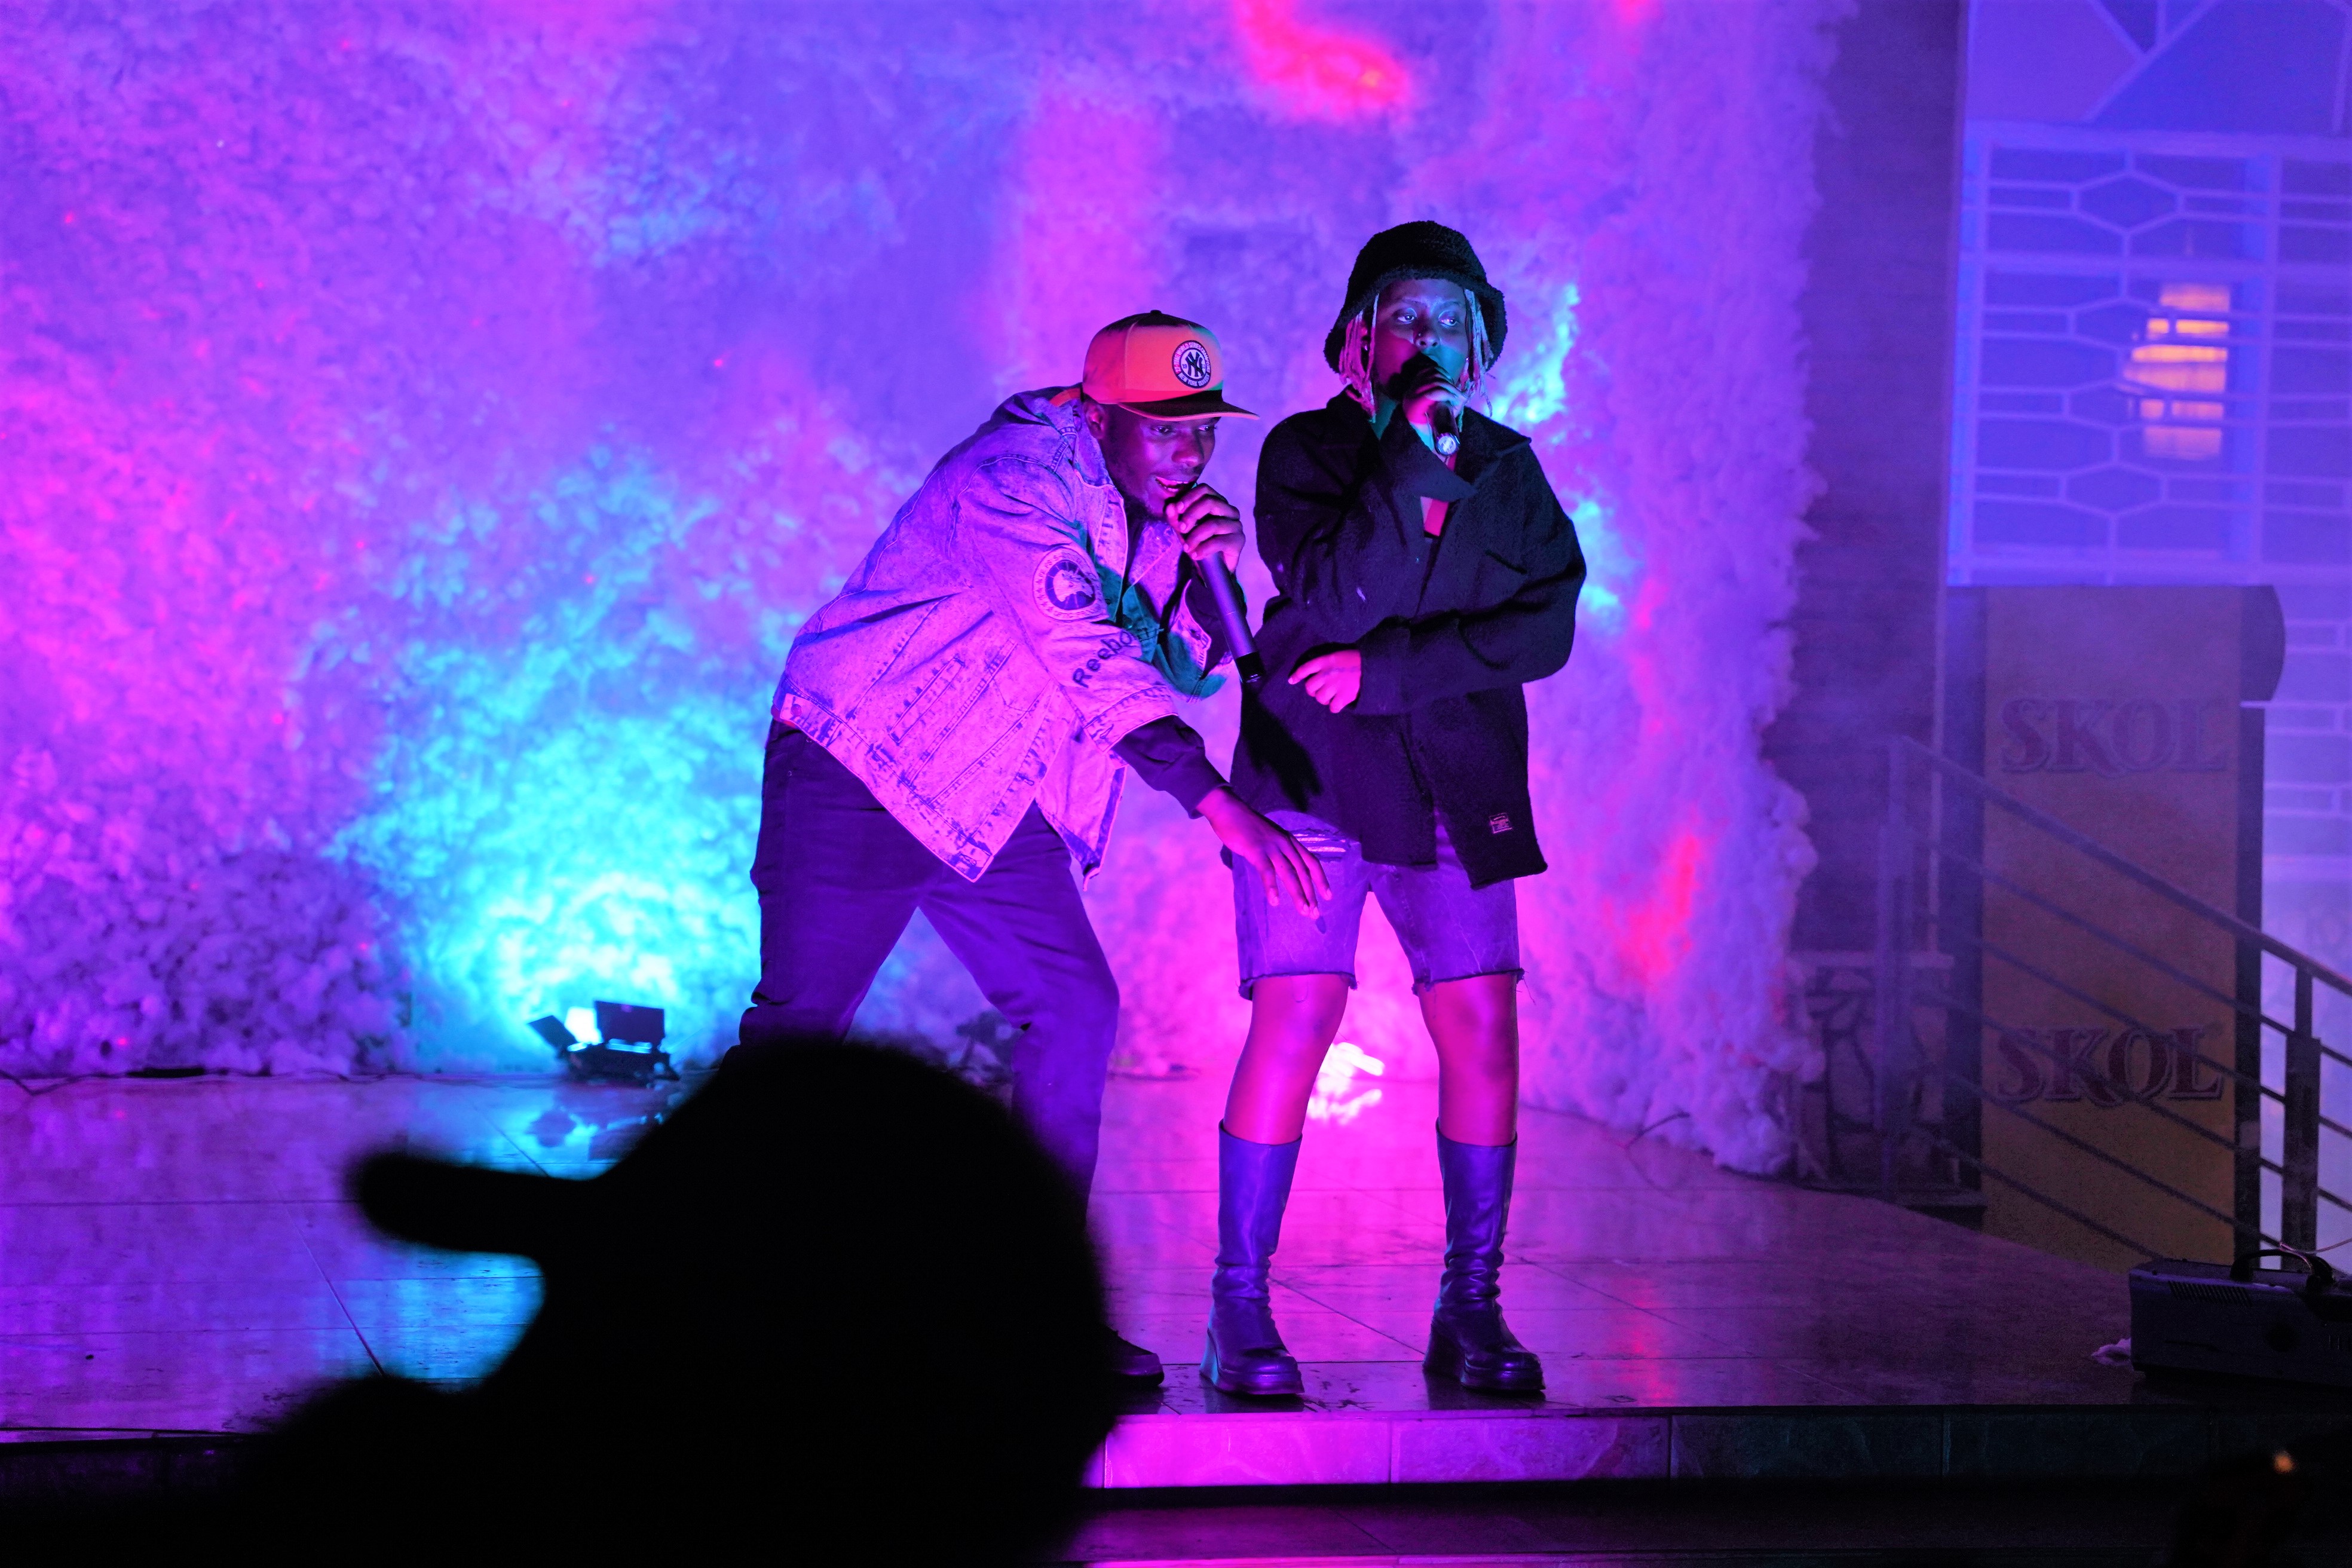 Ariel Wayz and Daddyisme performing their songs during Lost Soulsu2019 art experience show at Envision in Kigali on July 22. All Photos by Craish Bahizi